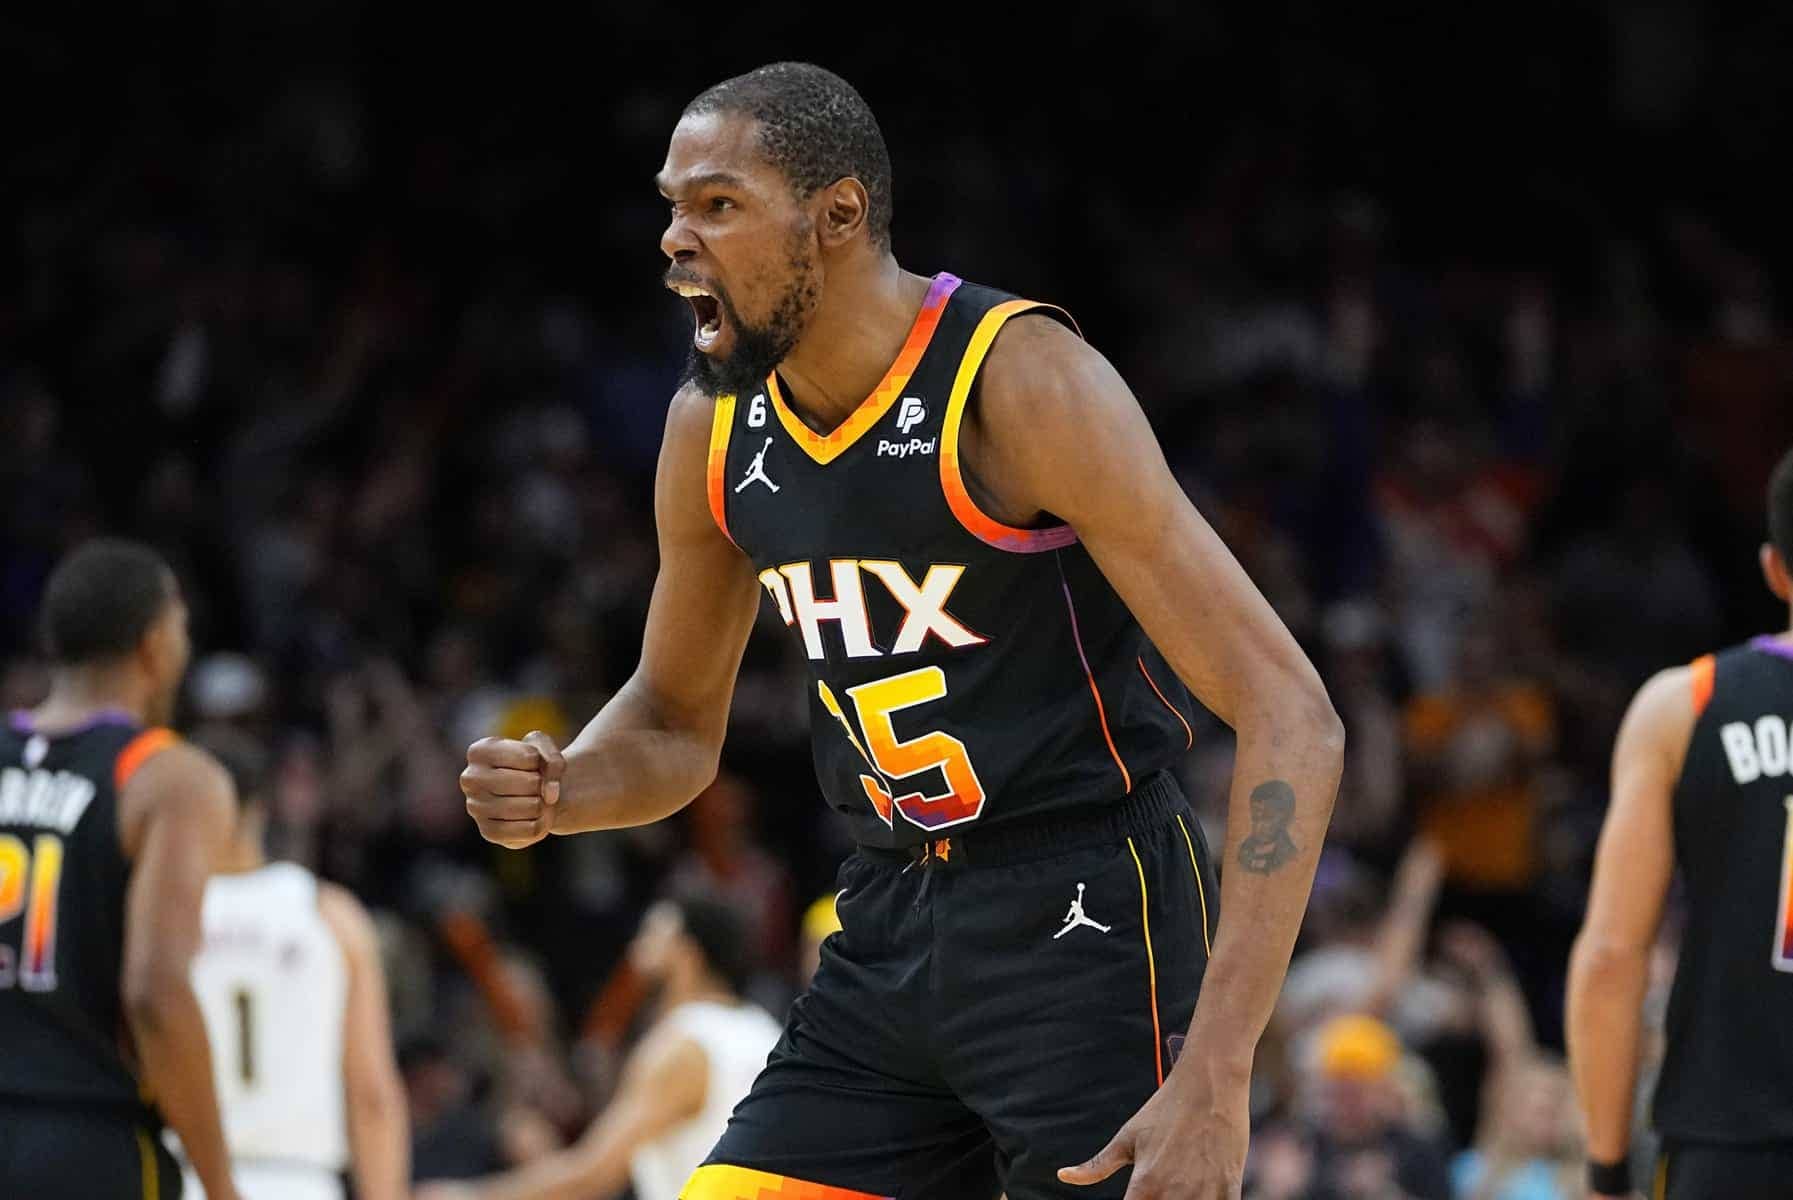 Kevin Durant Suns debut prop picks predictions for Wednesday